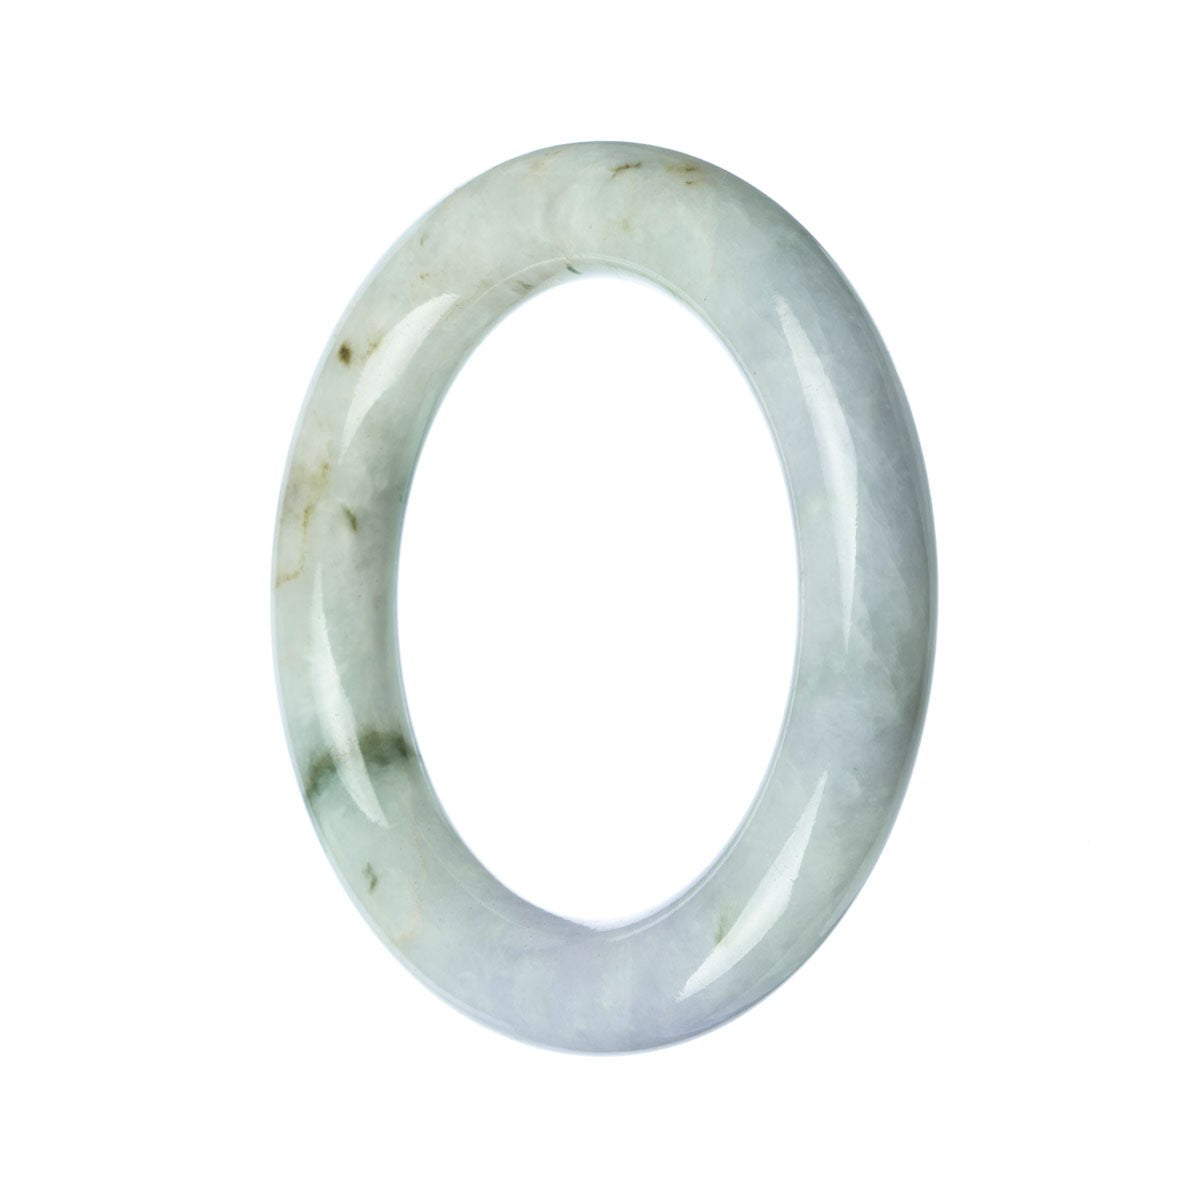 Close-up of a round white Burma jade bracelet, showcasing the natural beauty and elegance of the untreated stone.